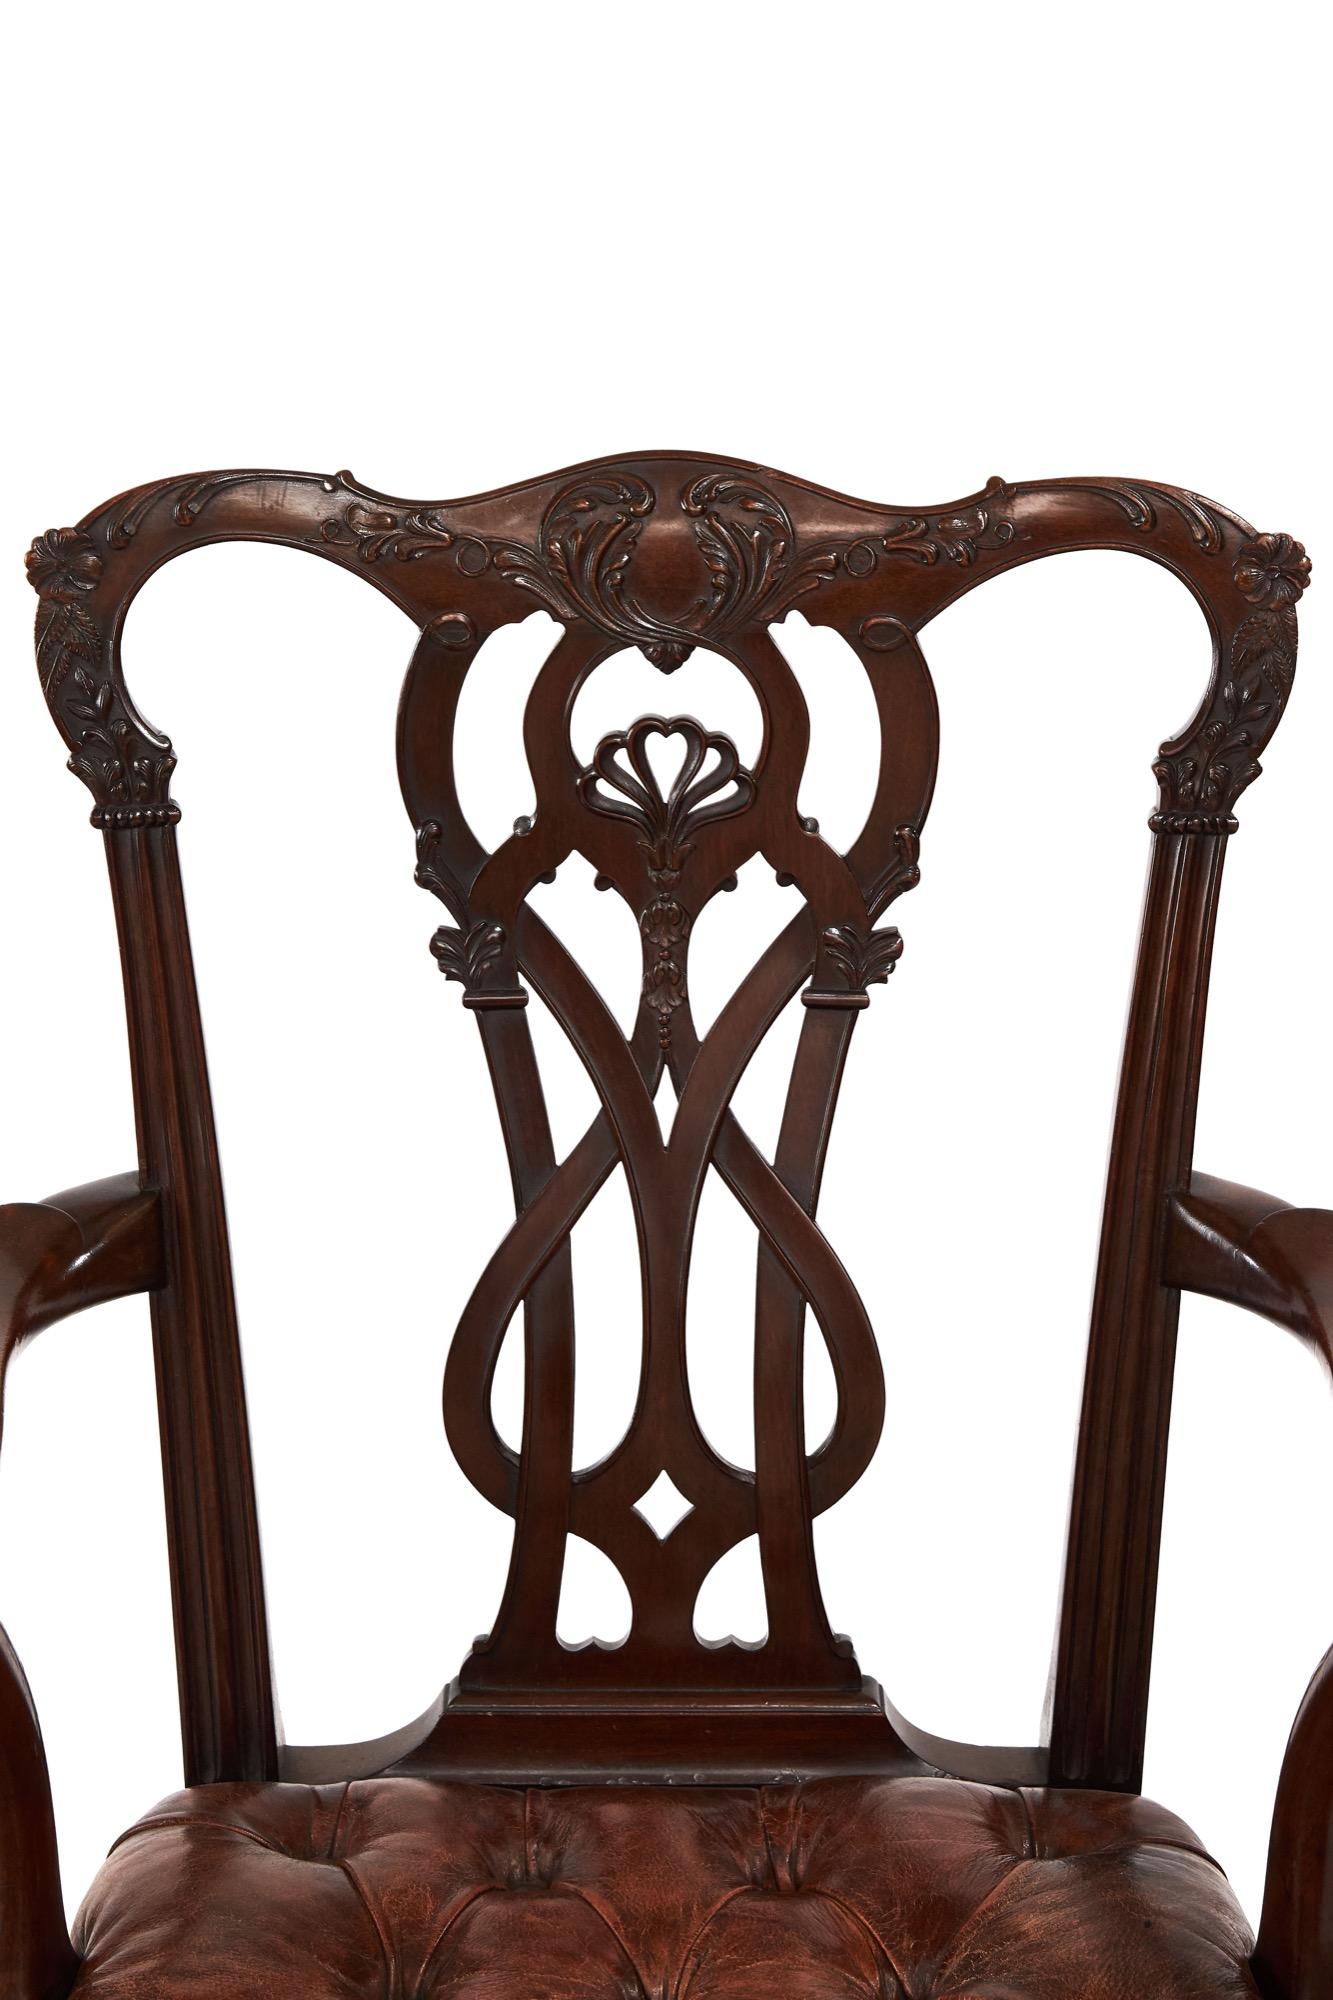 Hand-Carved Antique 19th Century Pair of Mahogany Chippendale Style Desk/Elbow Chairs